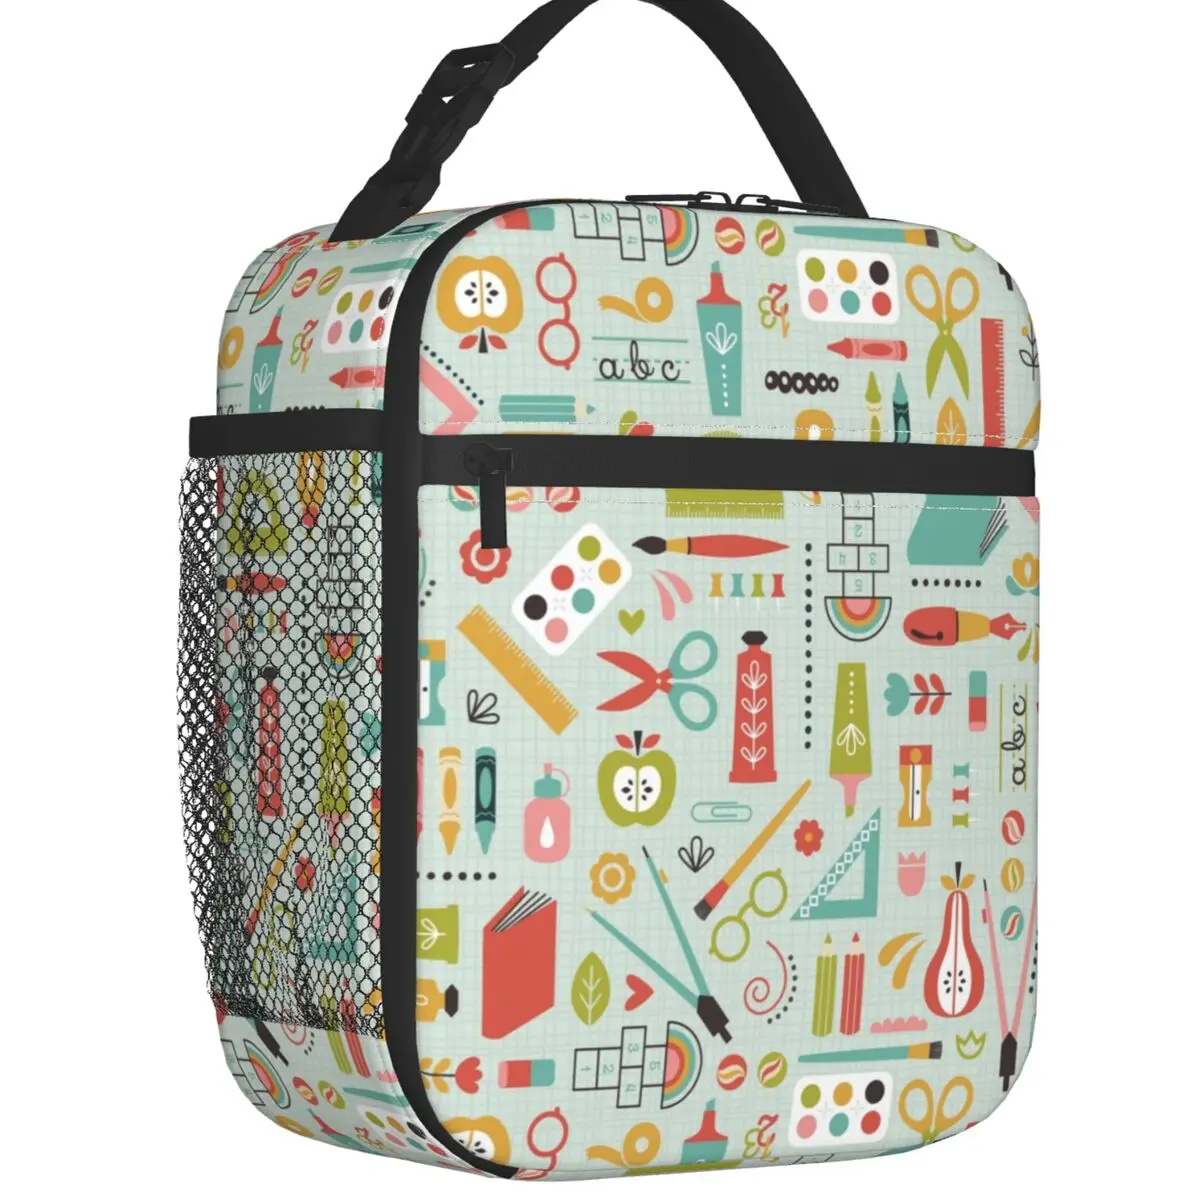 Back To School Pattern Rulers Pencils Thermal Insulated Lunch Bags Women Resuable Lunch Tote for Outdoor Picnic Storage Food Box